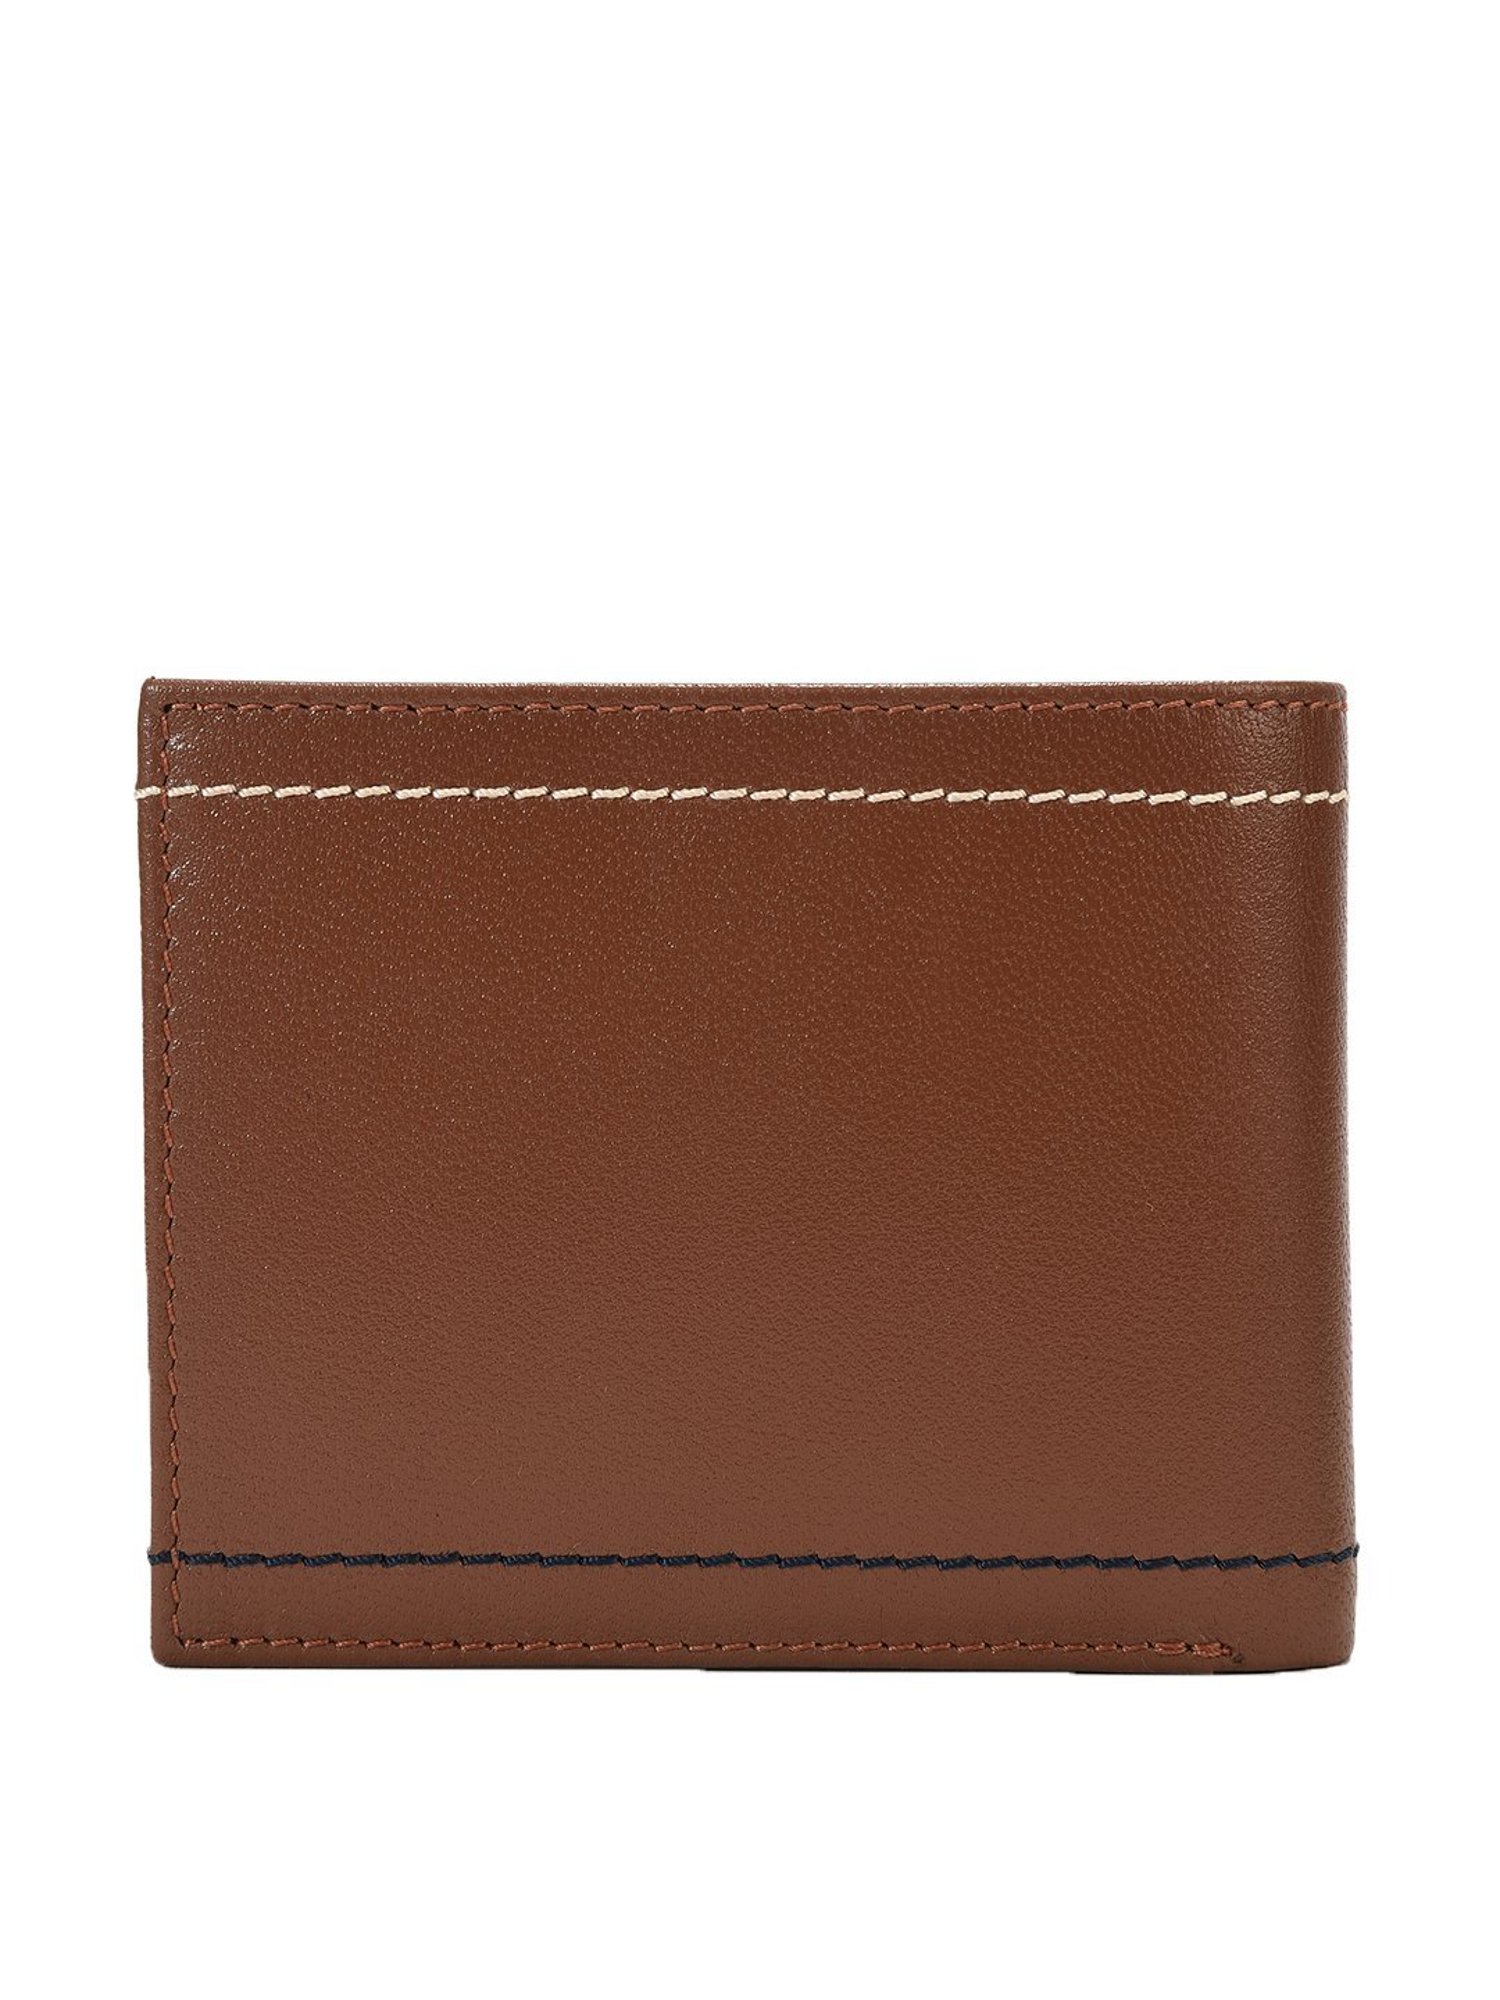 RL Stitchless Nappa Leather Wallet For Men – Walletsnbags